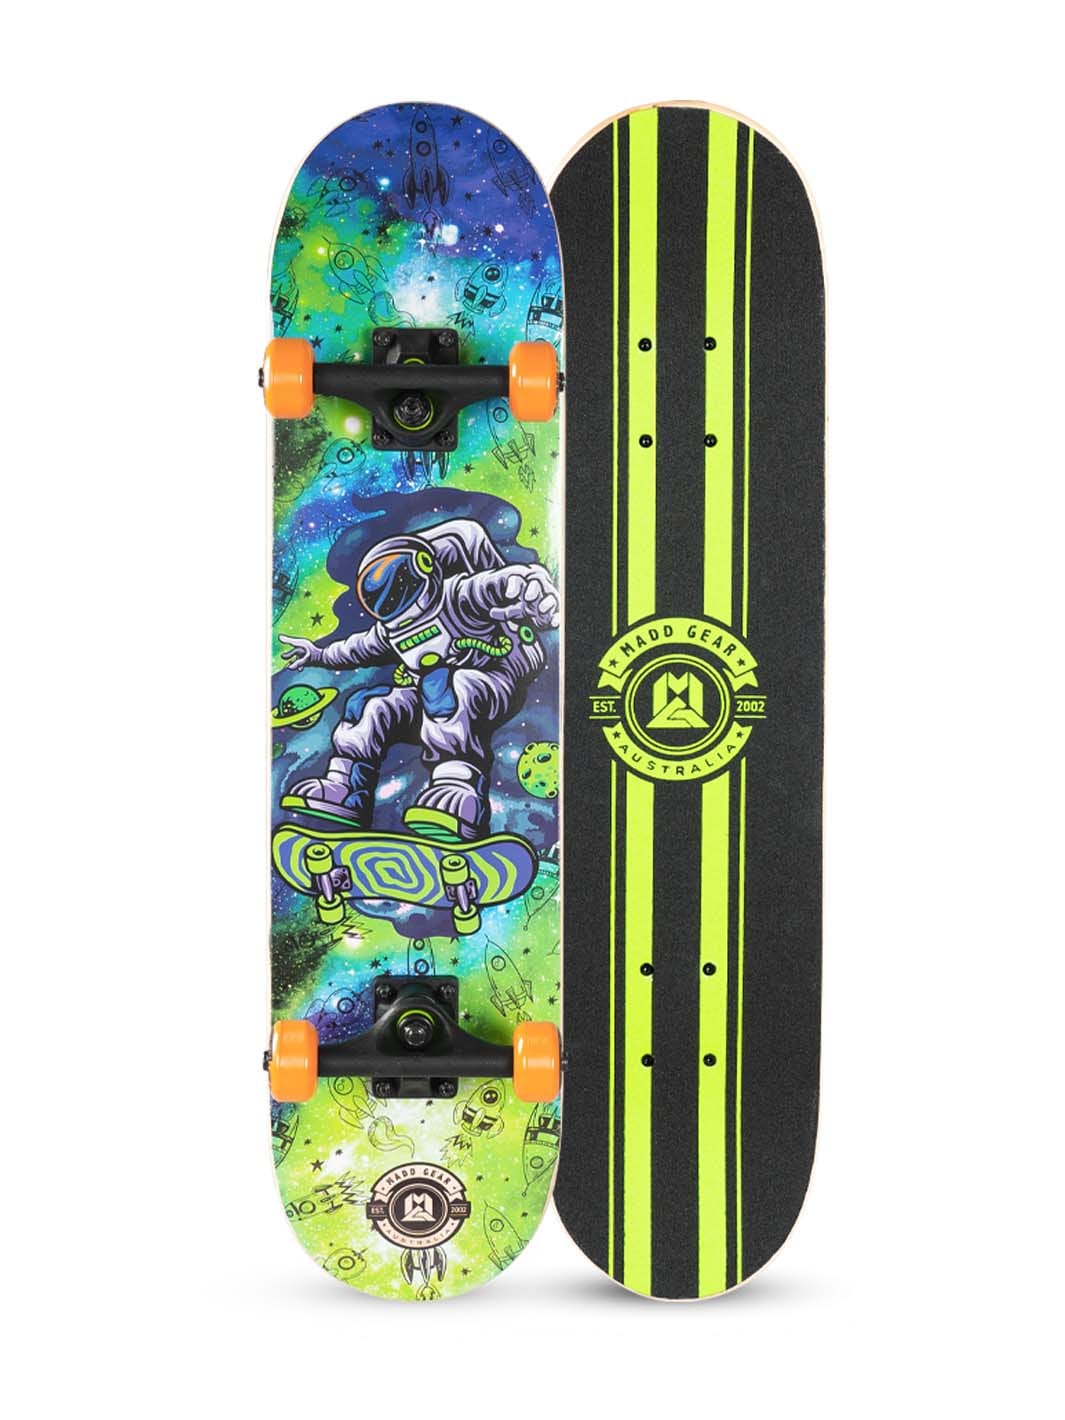 Madd Gear 31" Board Skateboard Popsicle Complete High Quality Maple Ply Kids Childrens Trick Skate Park Space Cool Graphics Green